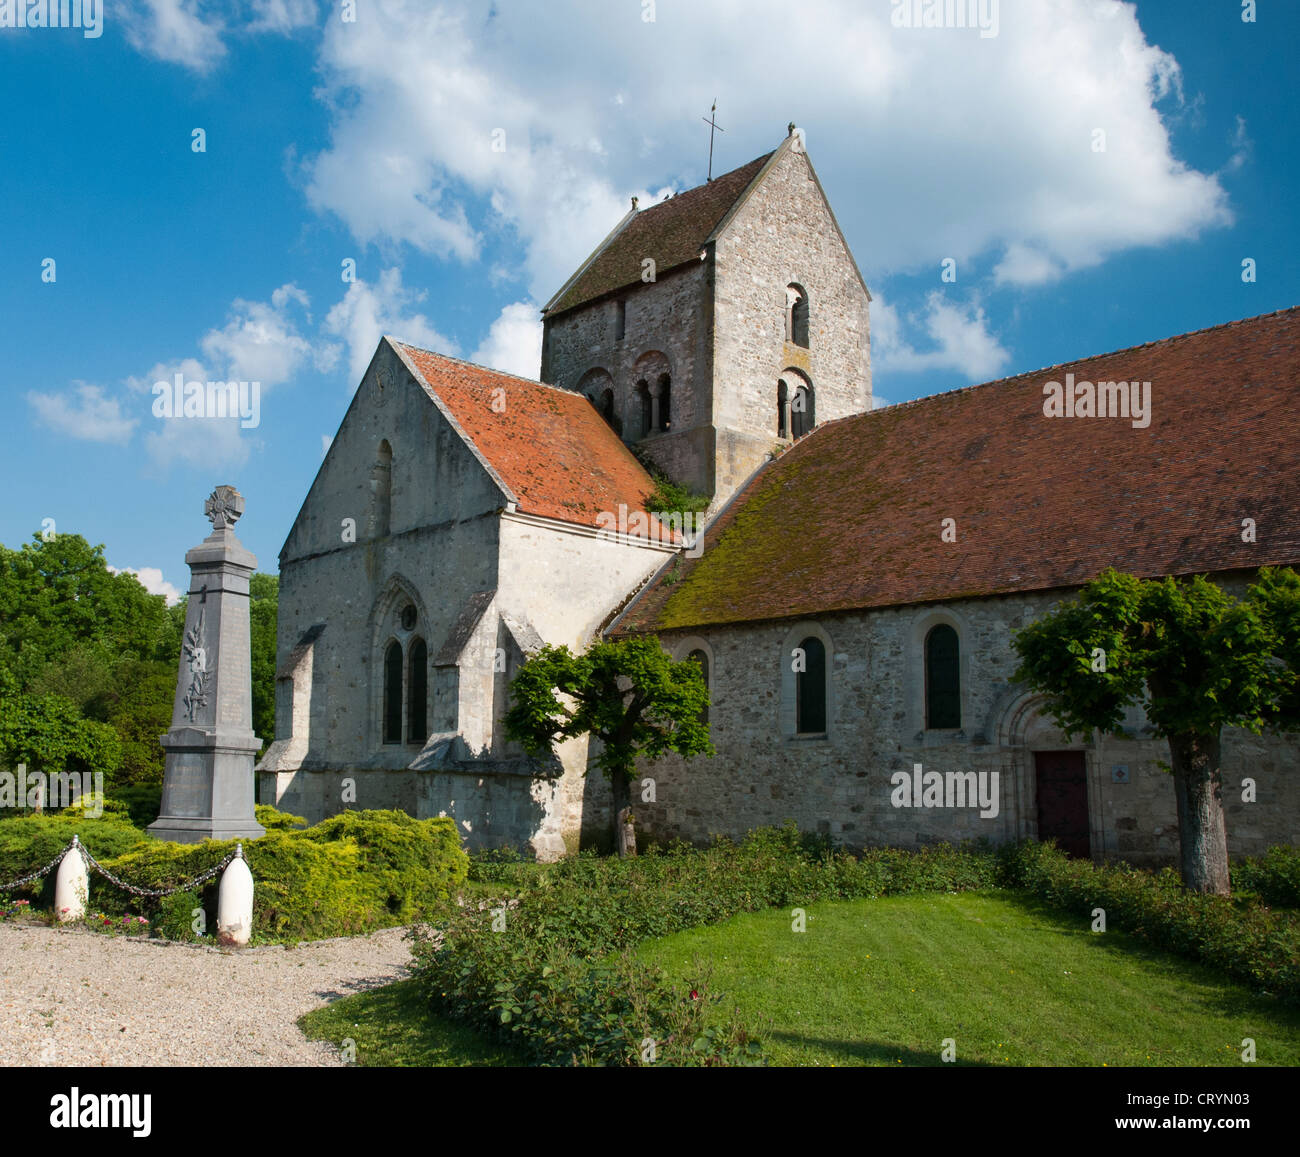 Pretty French Church and war memorial in Verneuil, Champagne region, France Stock Photo